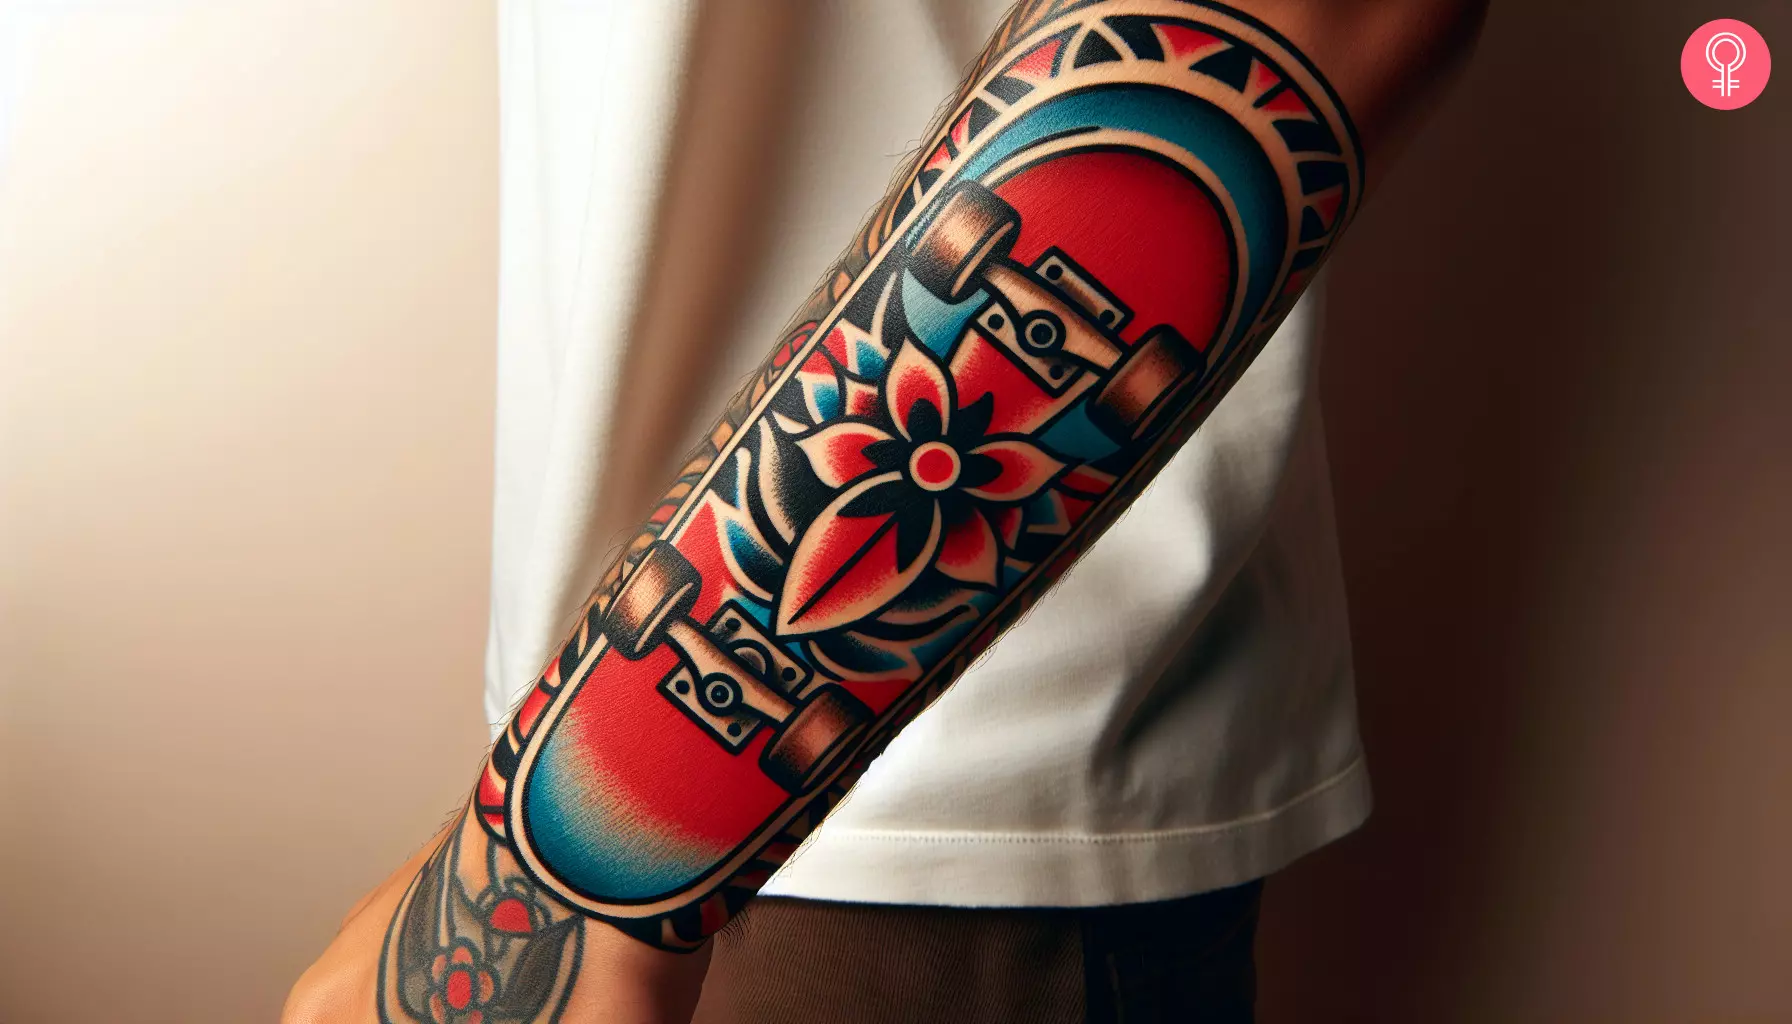 A traditional skateboard tattoo in black, red, and blue ink on the forearm